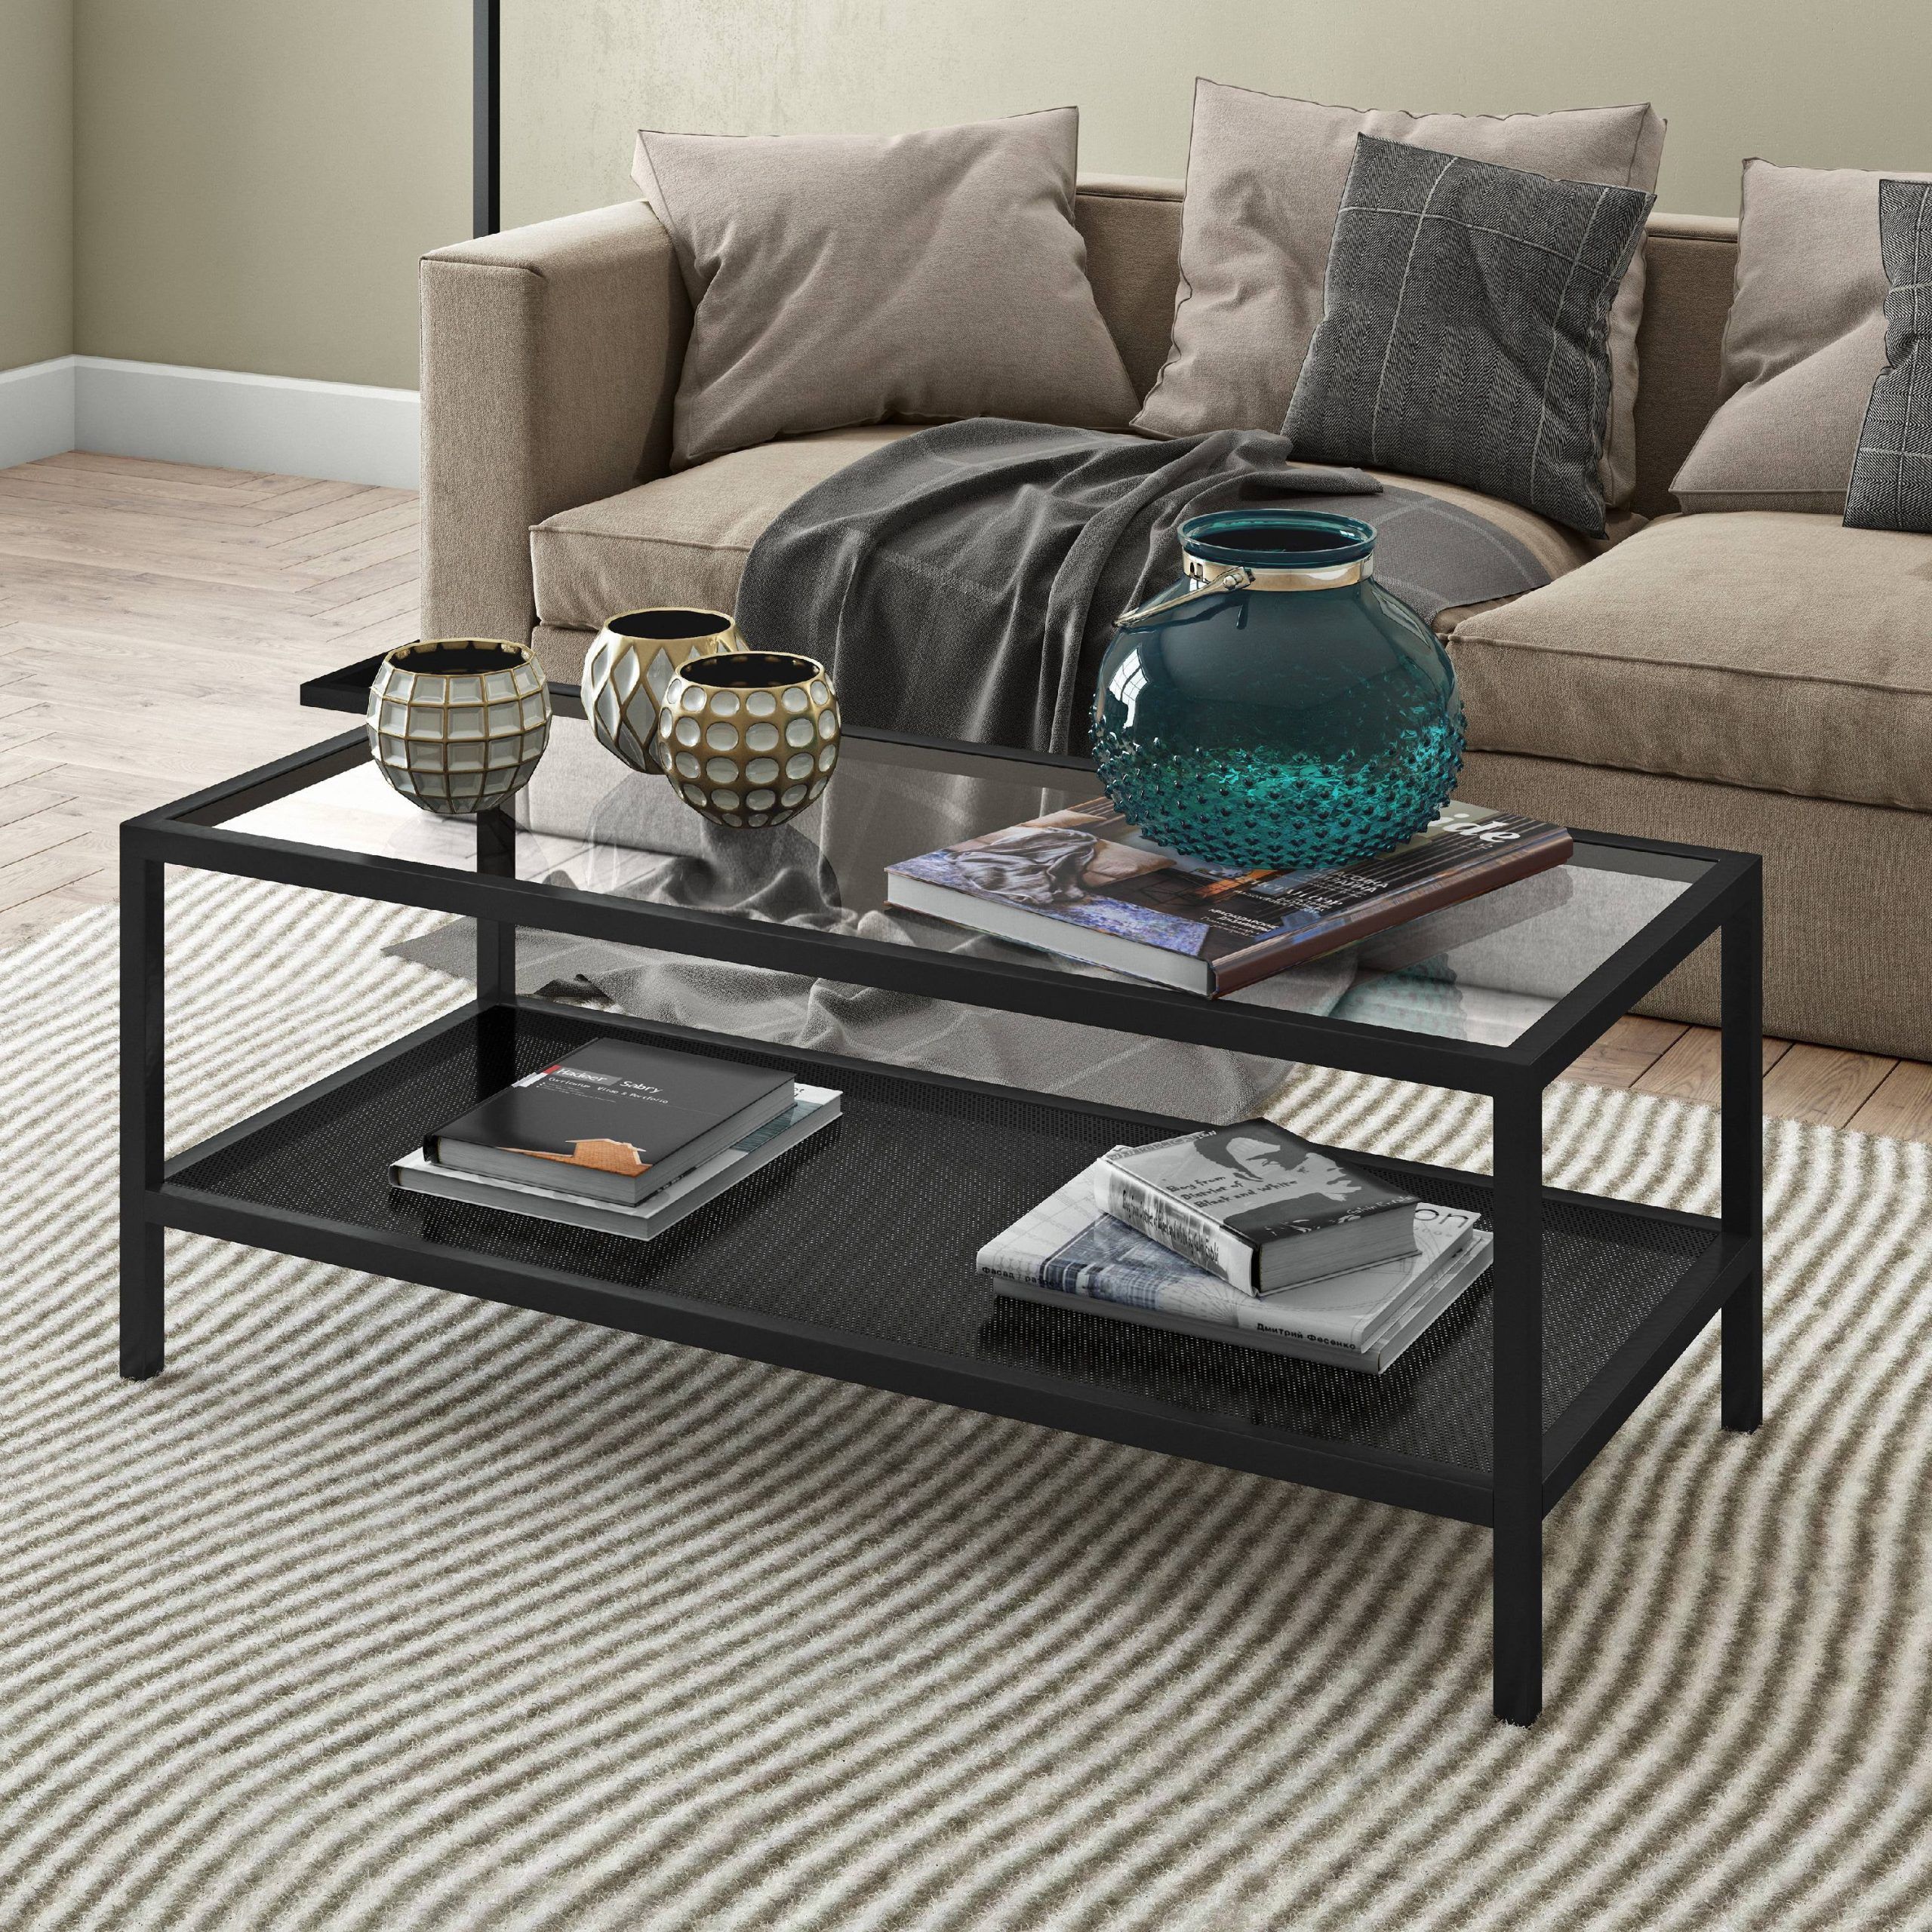 Evelyn&zoe Contemporary Metal Coffee Table With Glass Top – Walmart In Metal 1 Shelf Coffee Tables (Gallery 1 of 20)